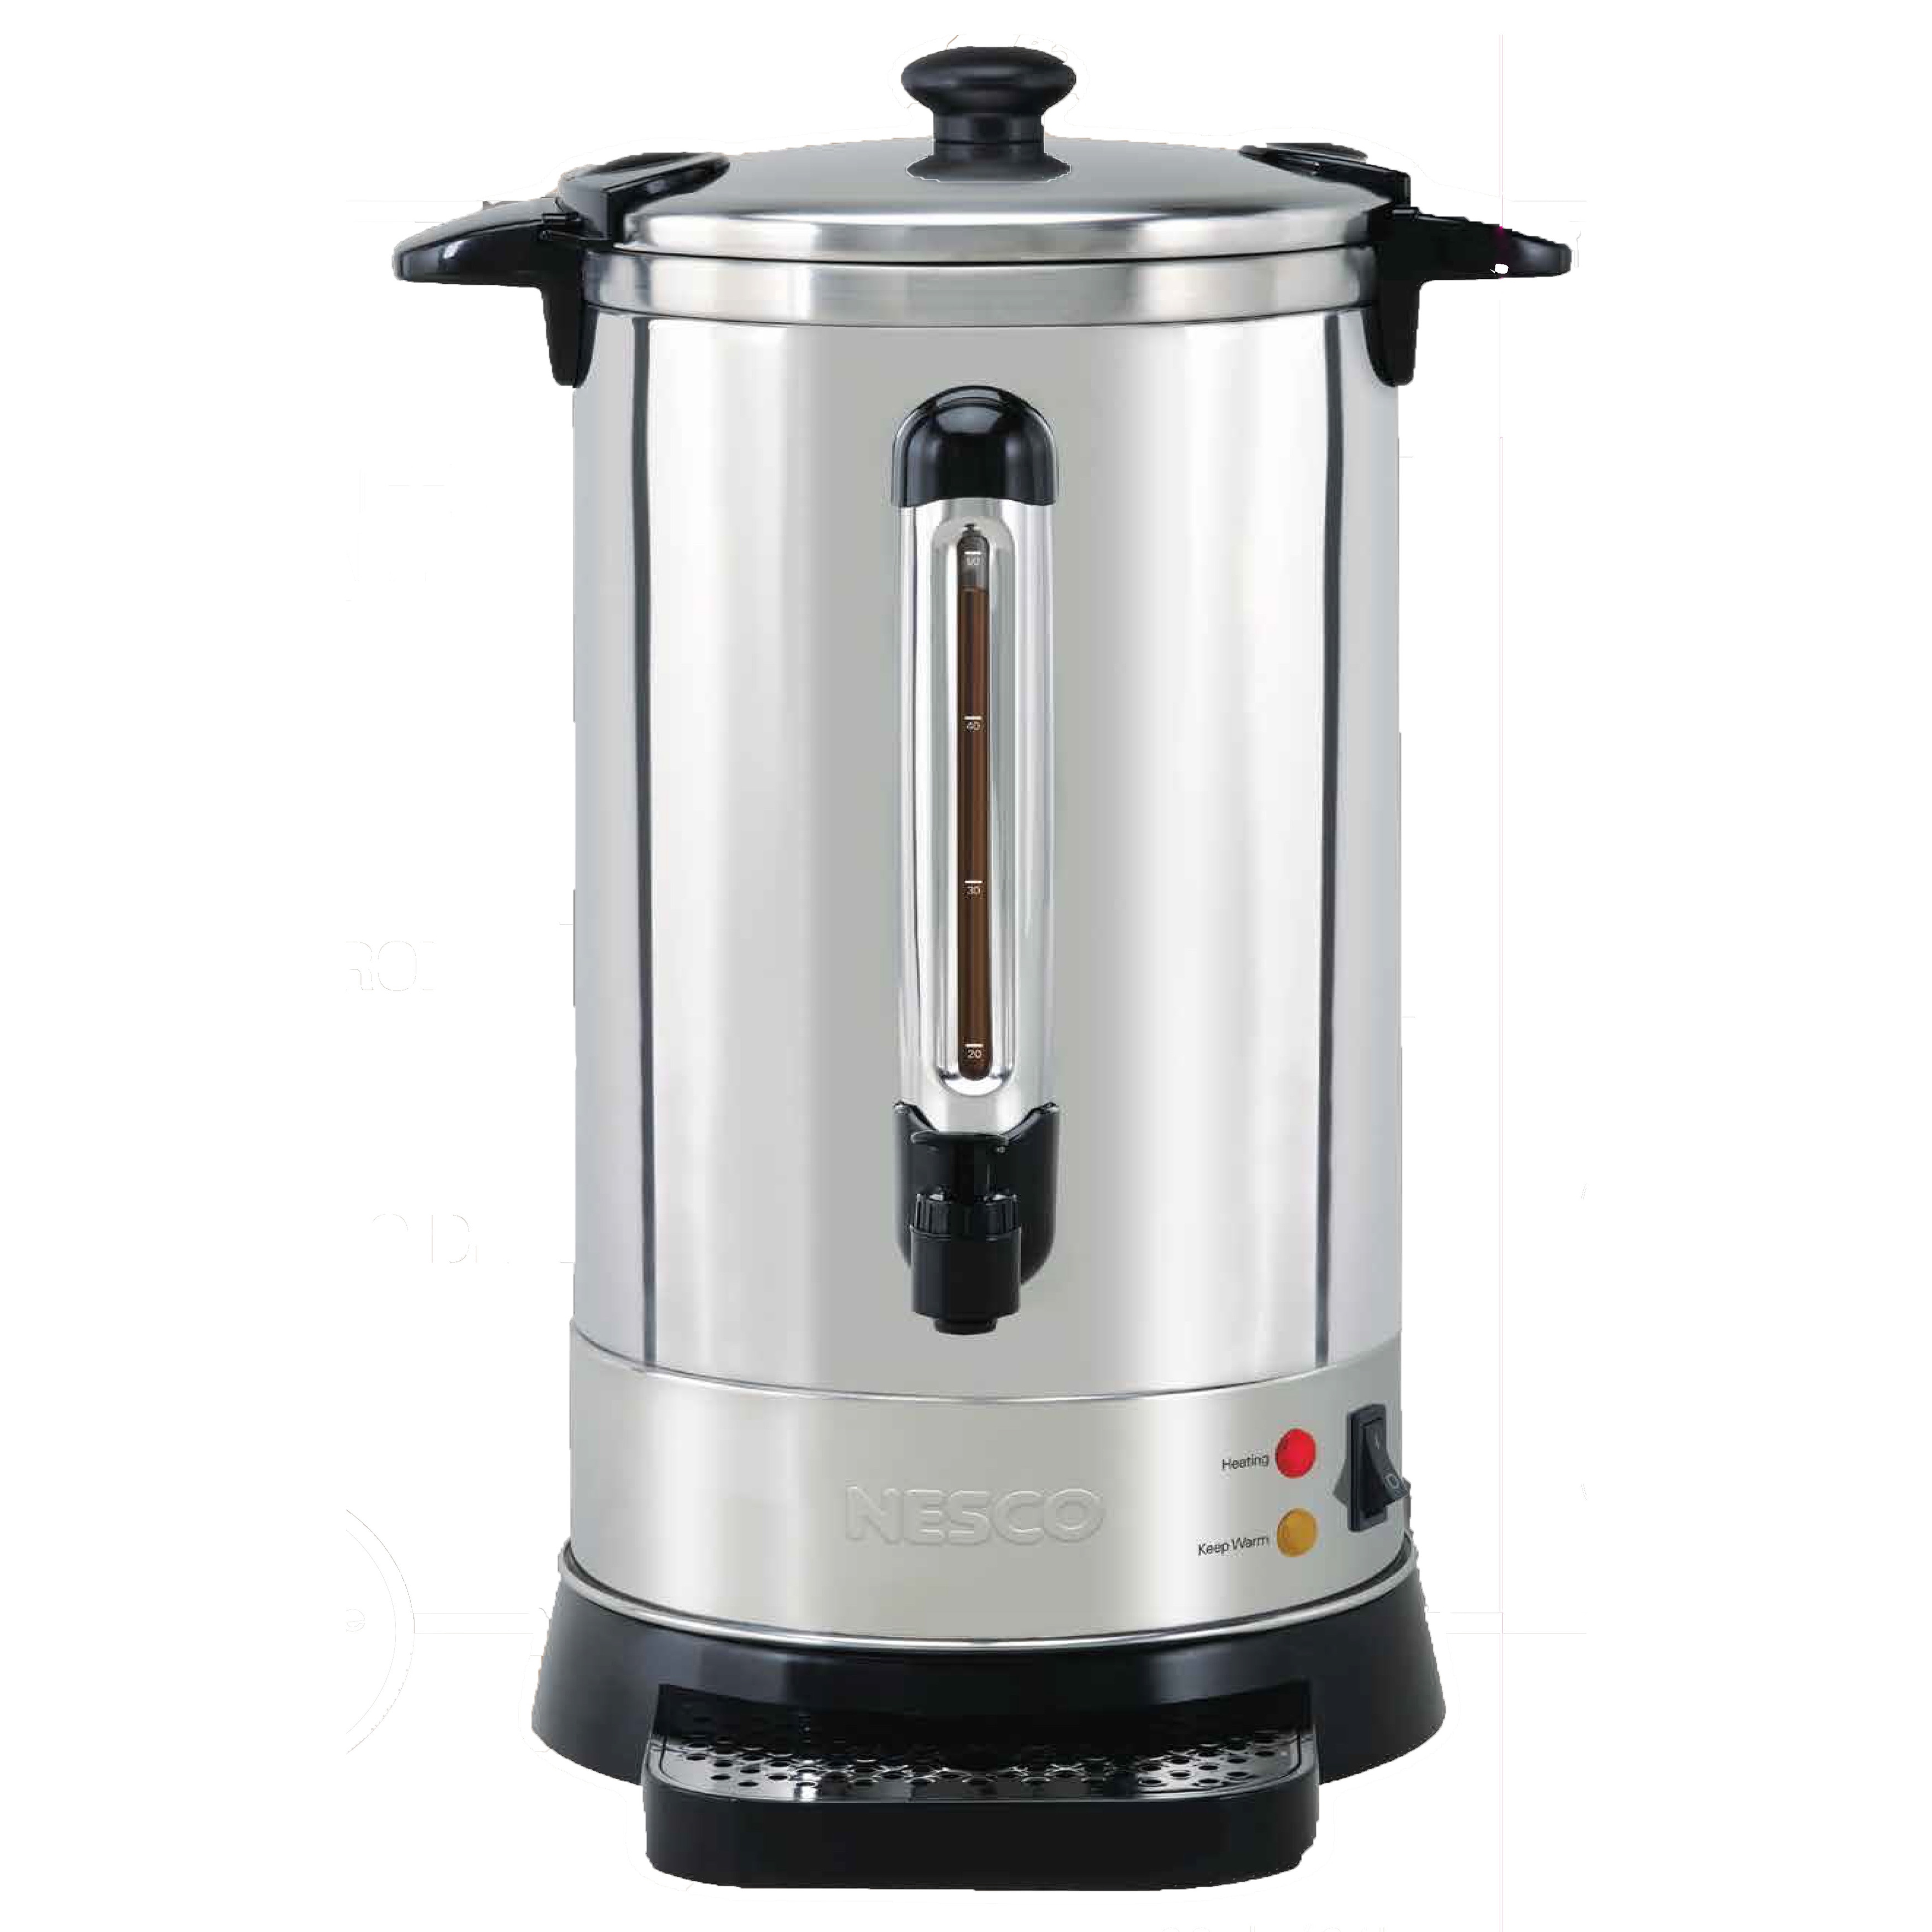 Nesco 50-Cup Stainless Steel Double Wall Coffee Urn with Locking Lid